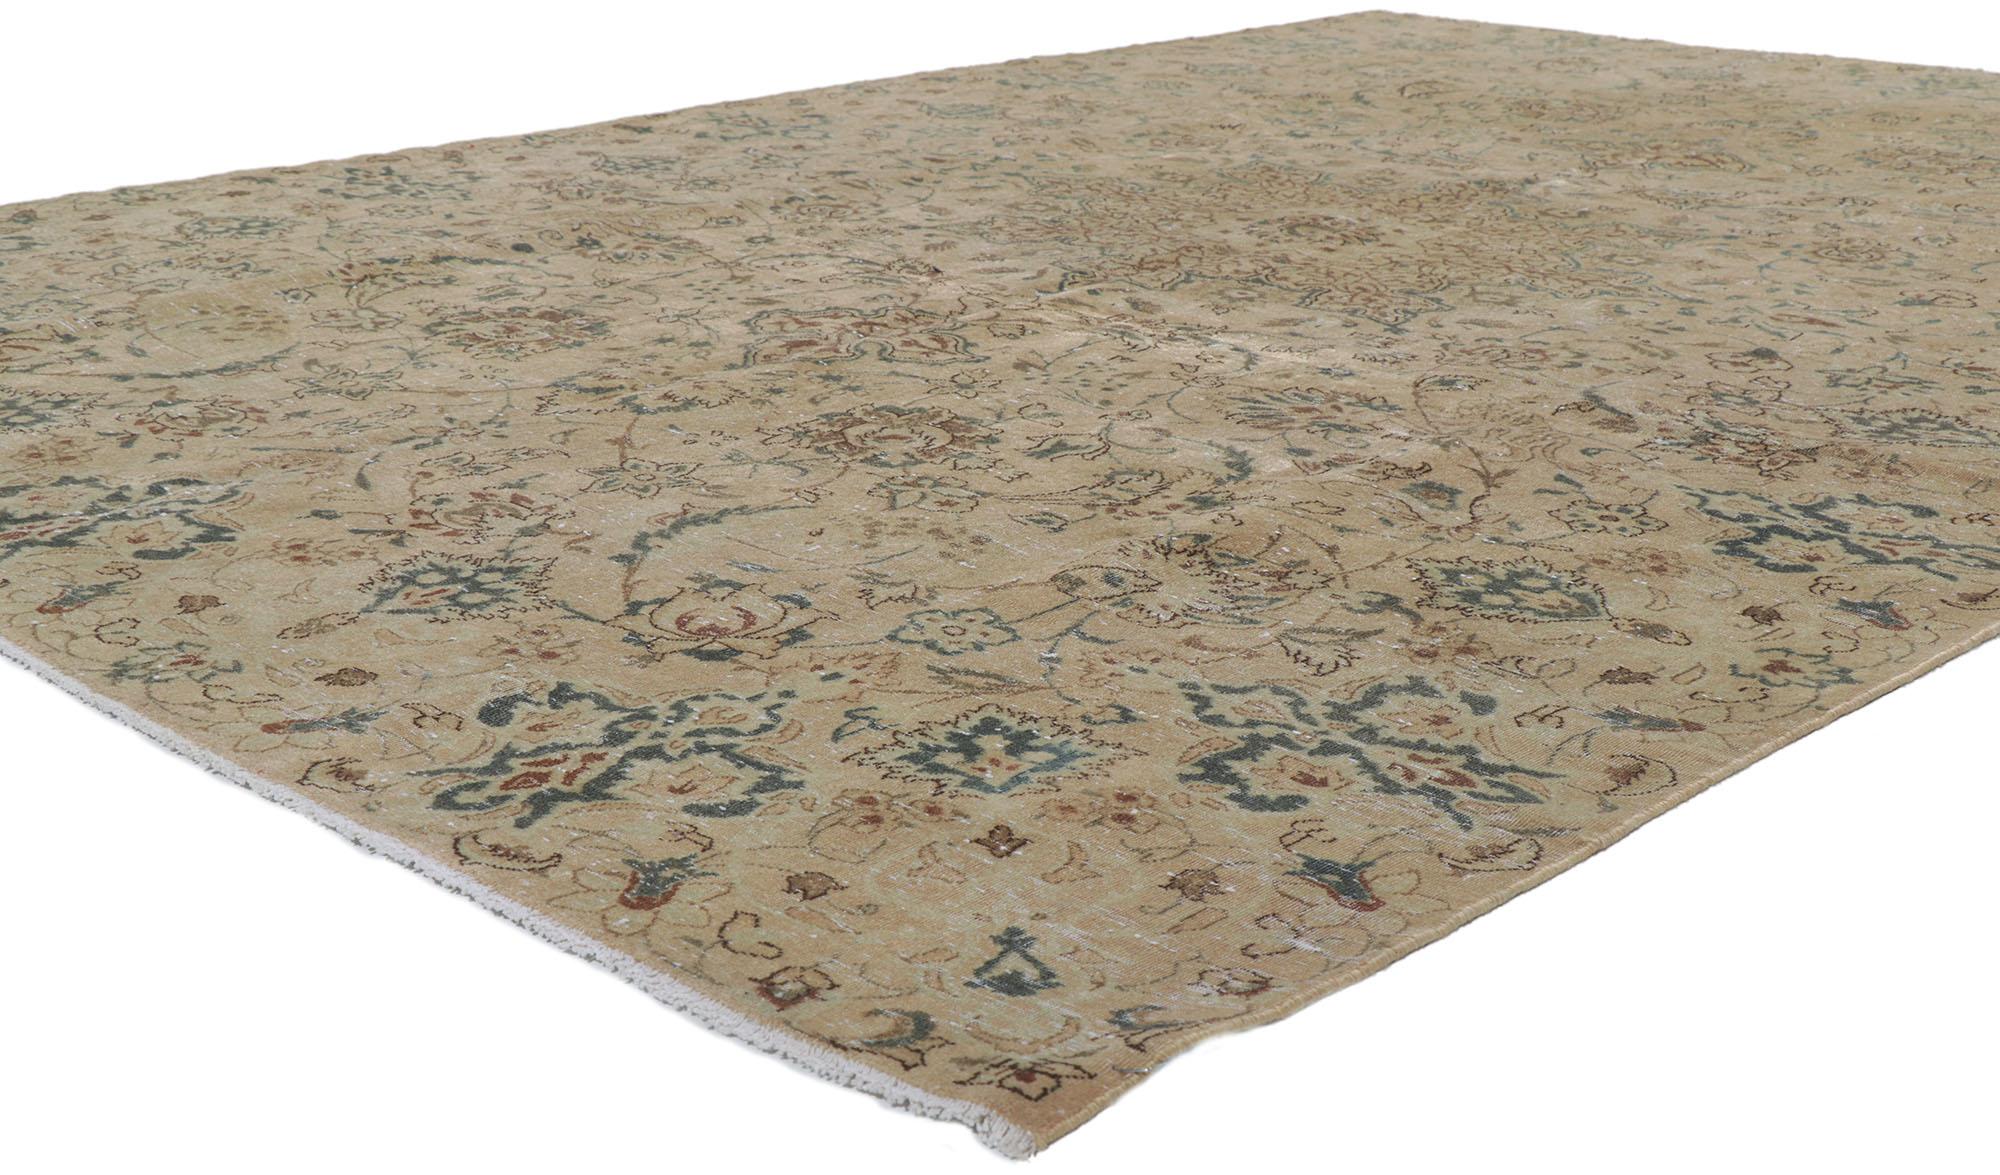 60994 Distressed Vintage Persian Isfahan rug 06'10 x 09'09.
Rendered in variegated shades of tan, sand, ecru, cerulean, Aegean, camel, teal green, verdigris, latte, and brown with other accent colors.
Abrash. Distressed. Antique Wash. Desirable